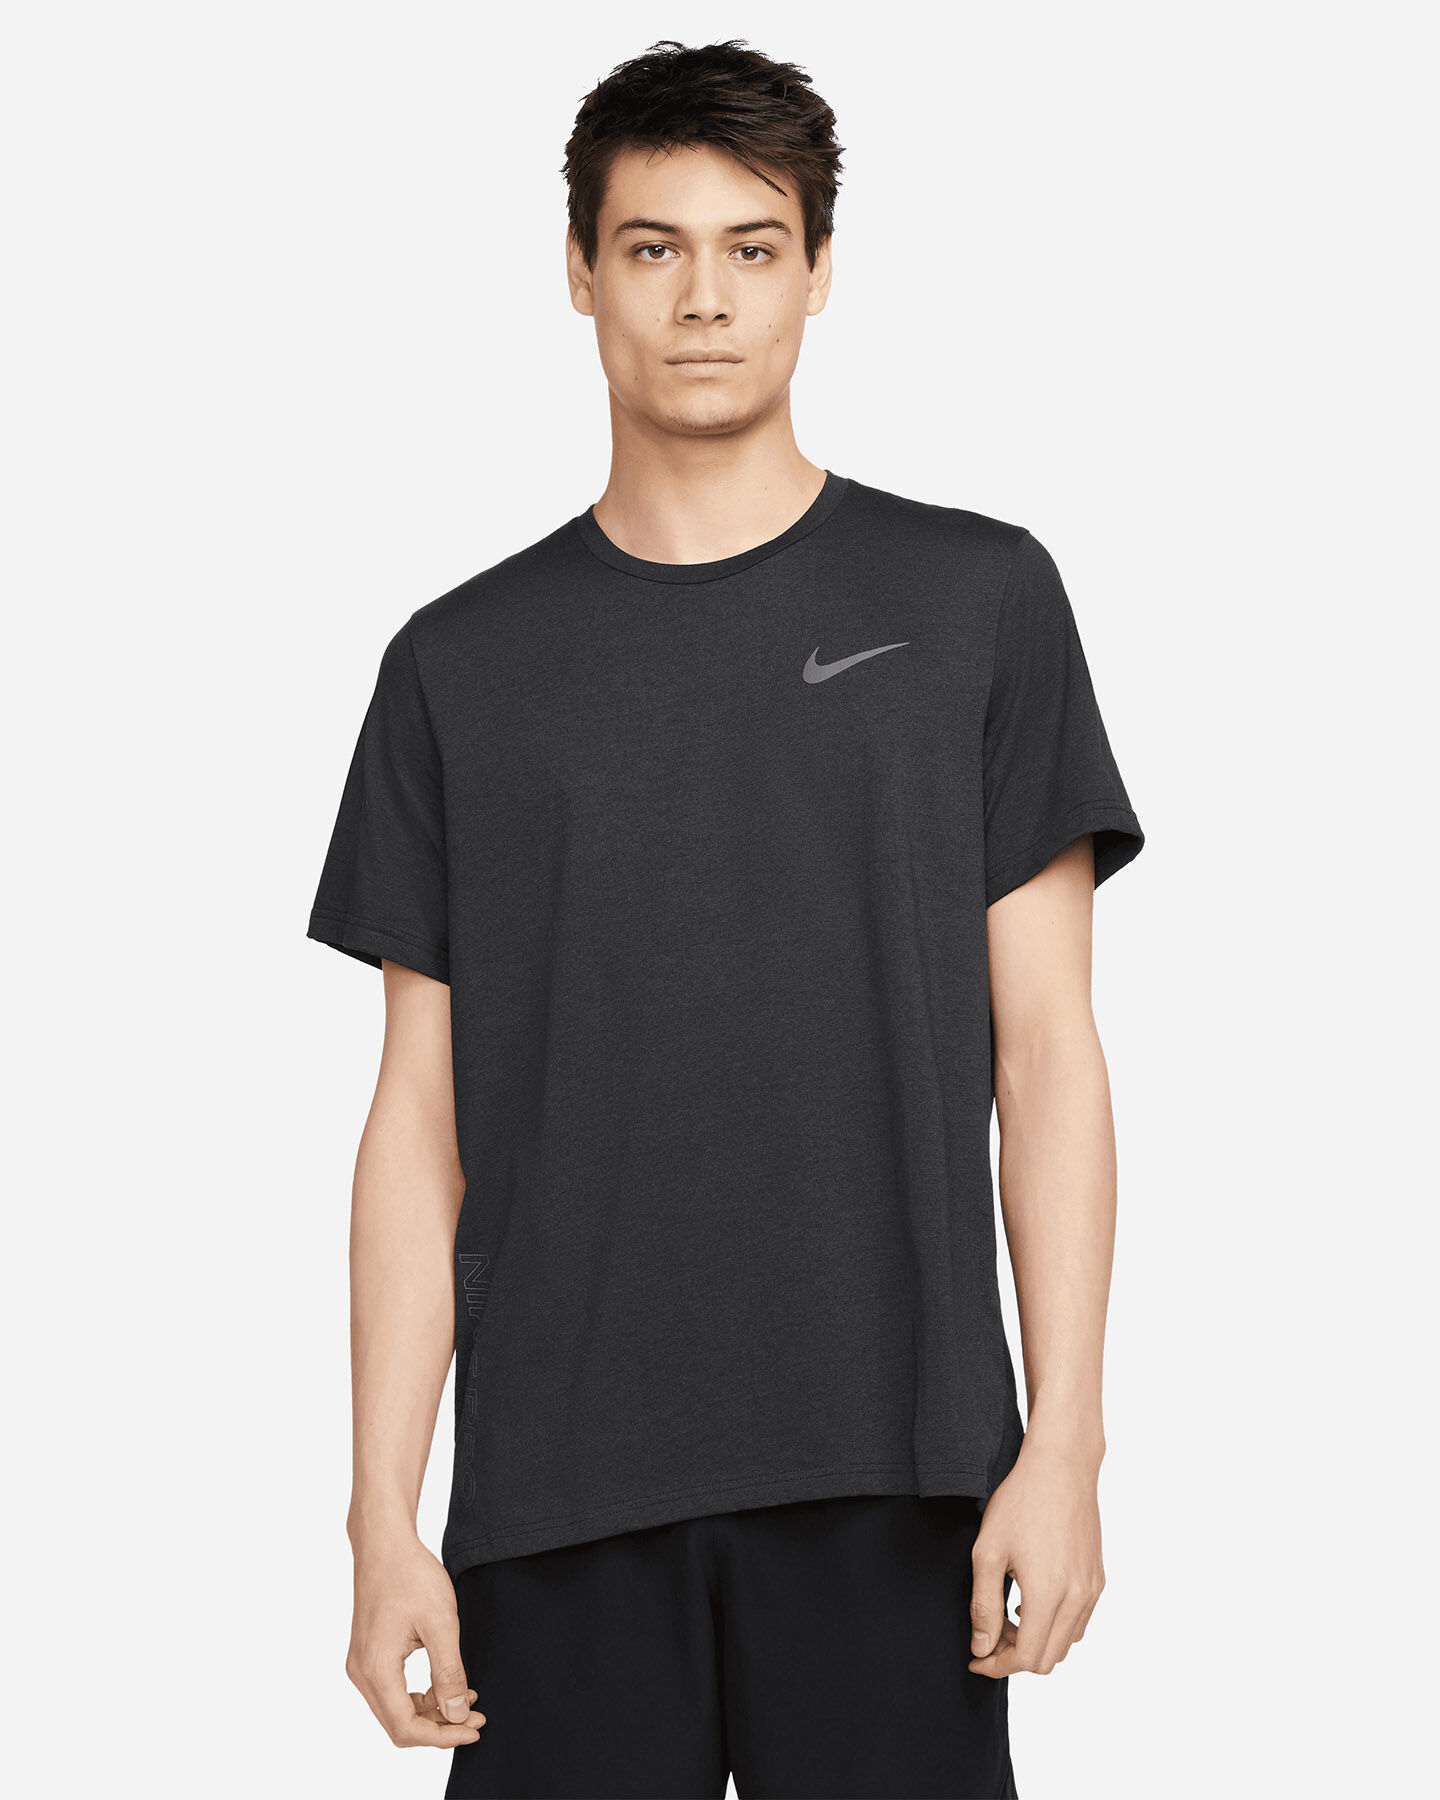  T-Shirt training NIKE NP DF BURNOUT 3.0 M S5492387|638|S scatto 0